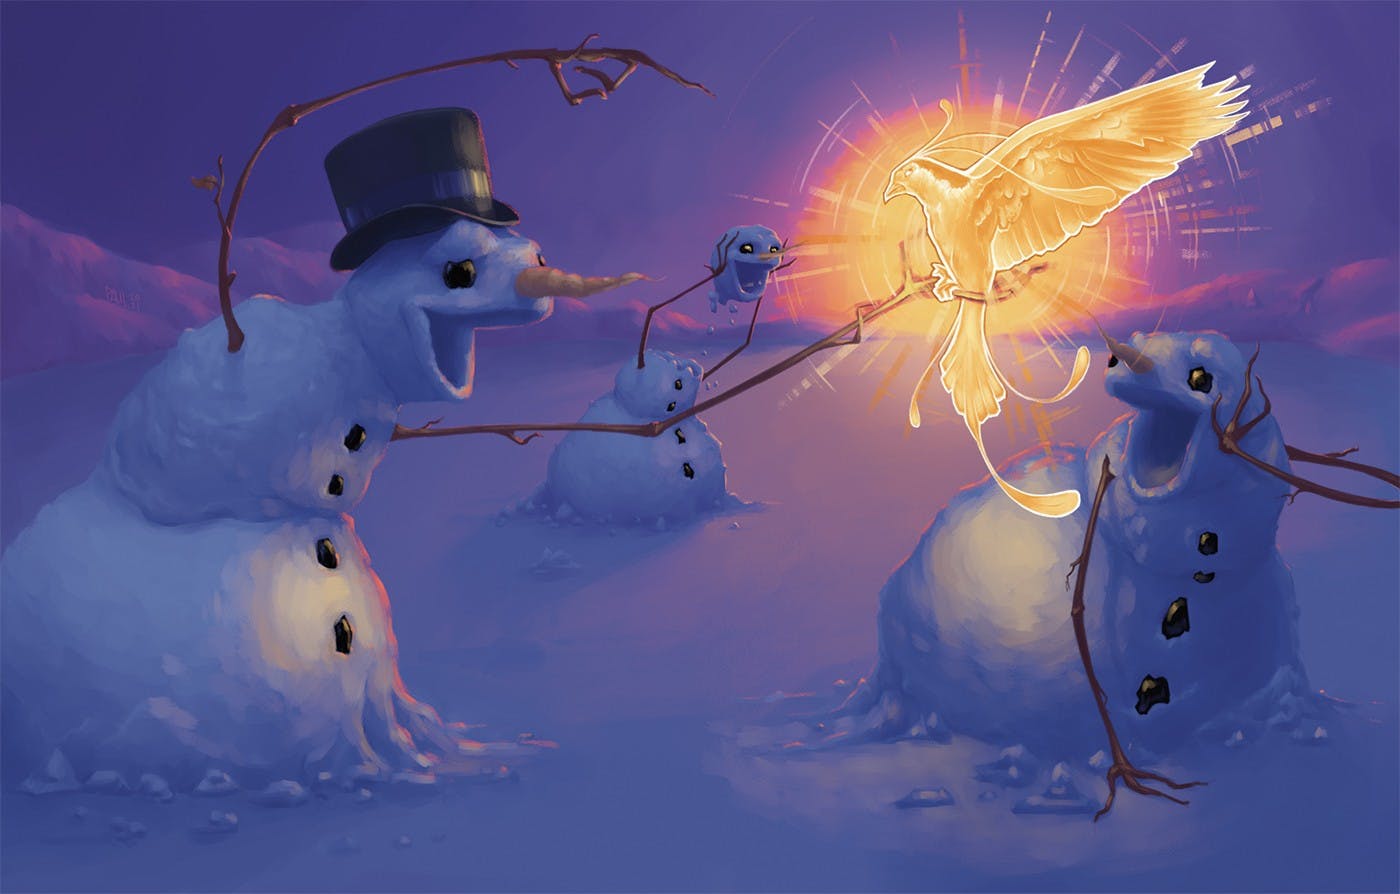 A digital painting of three snow-people looking amazedly at a golden glowing bird perching on the hand of the snow-person in the foreground; they are standing in a snowy flat among mountains in the distance and everything is lit with a purple blue hue.